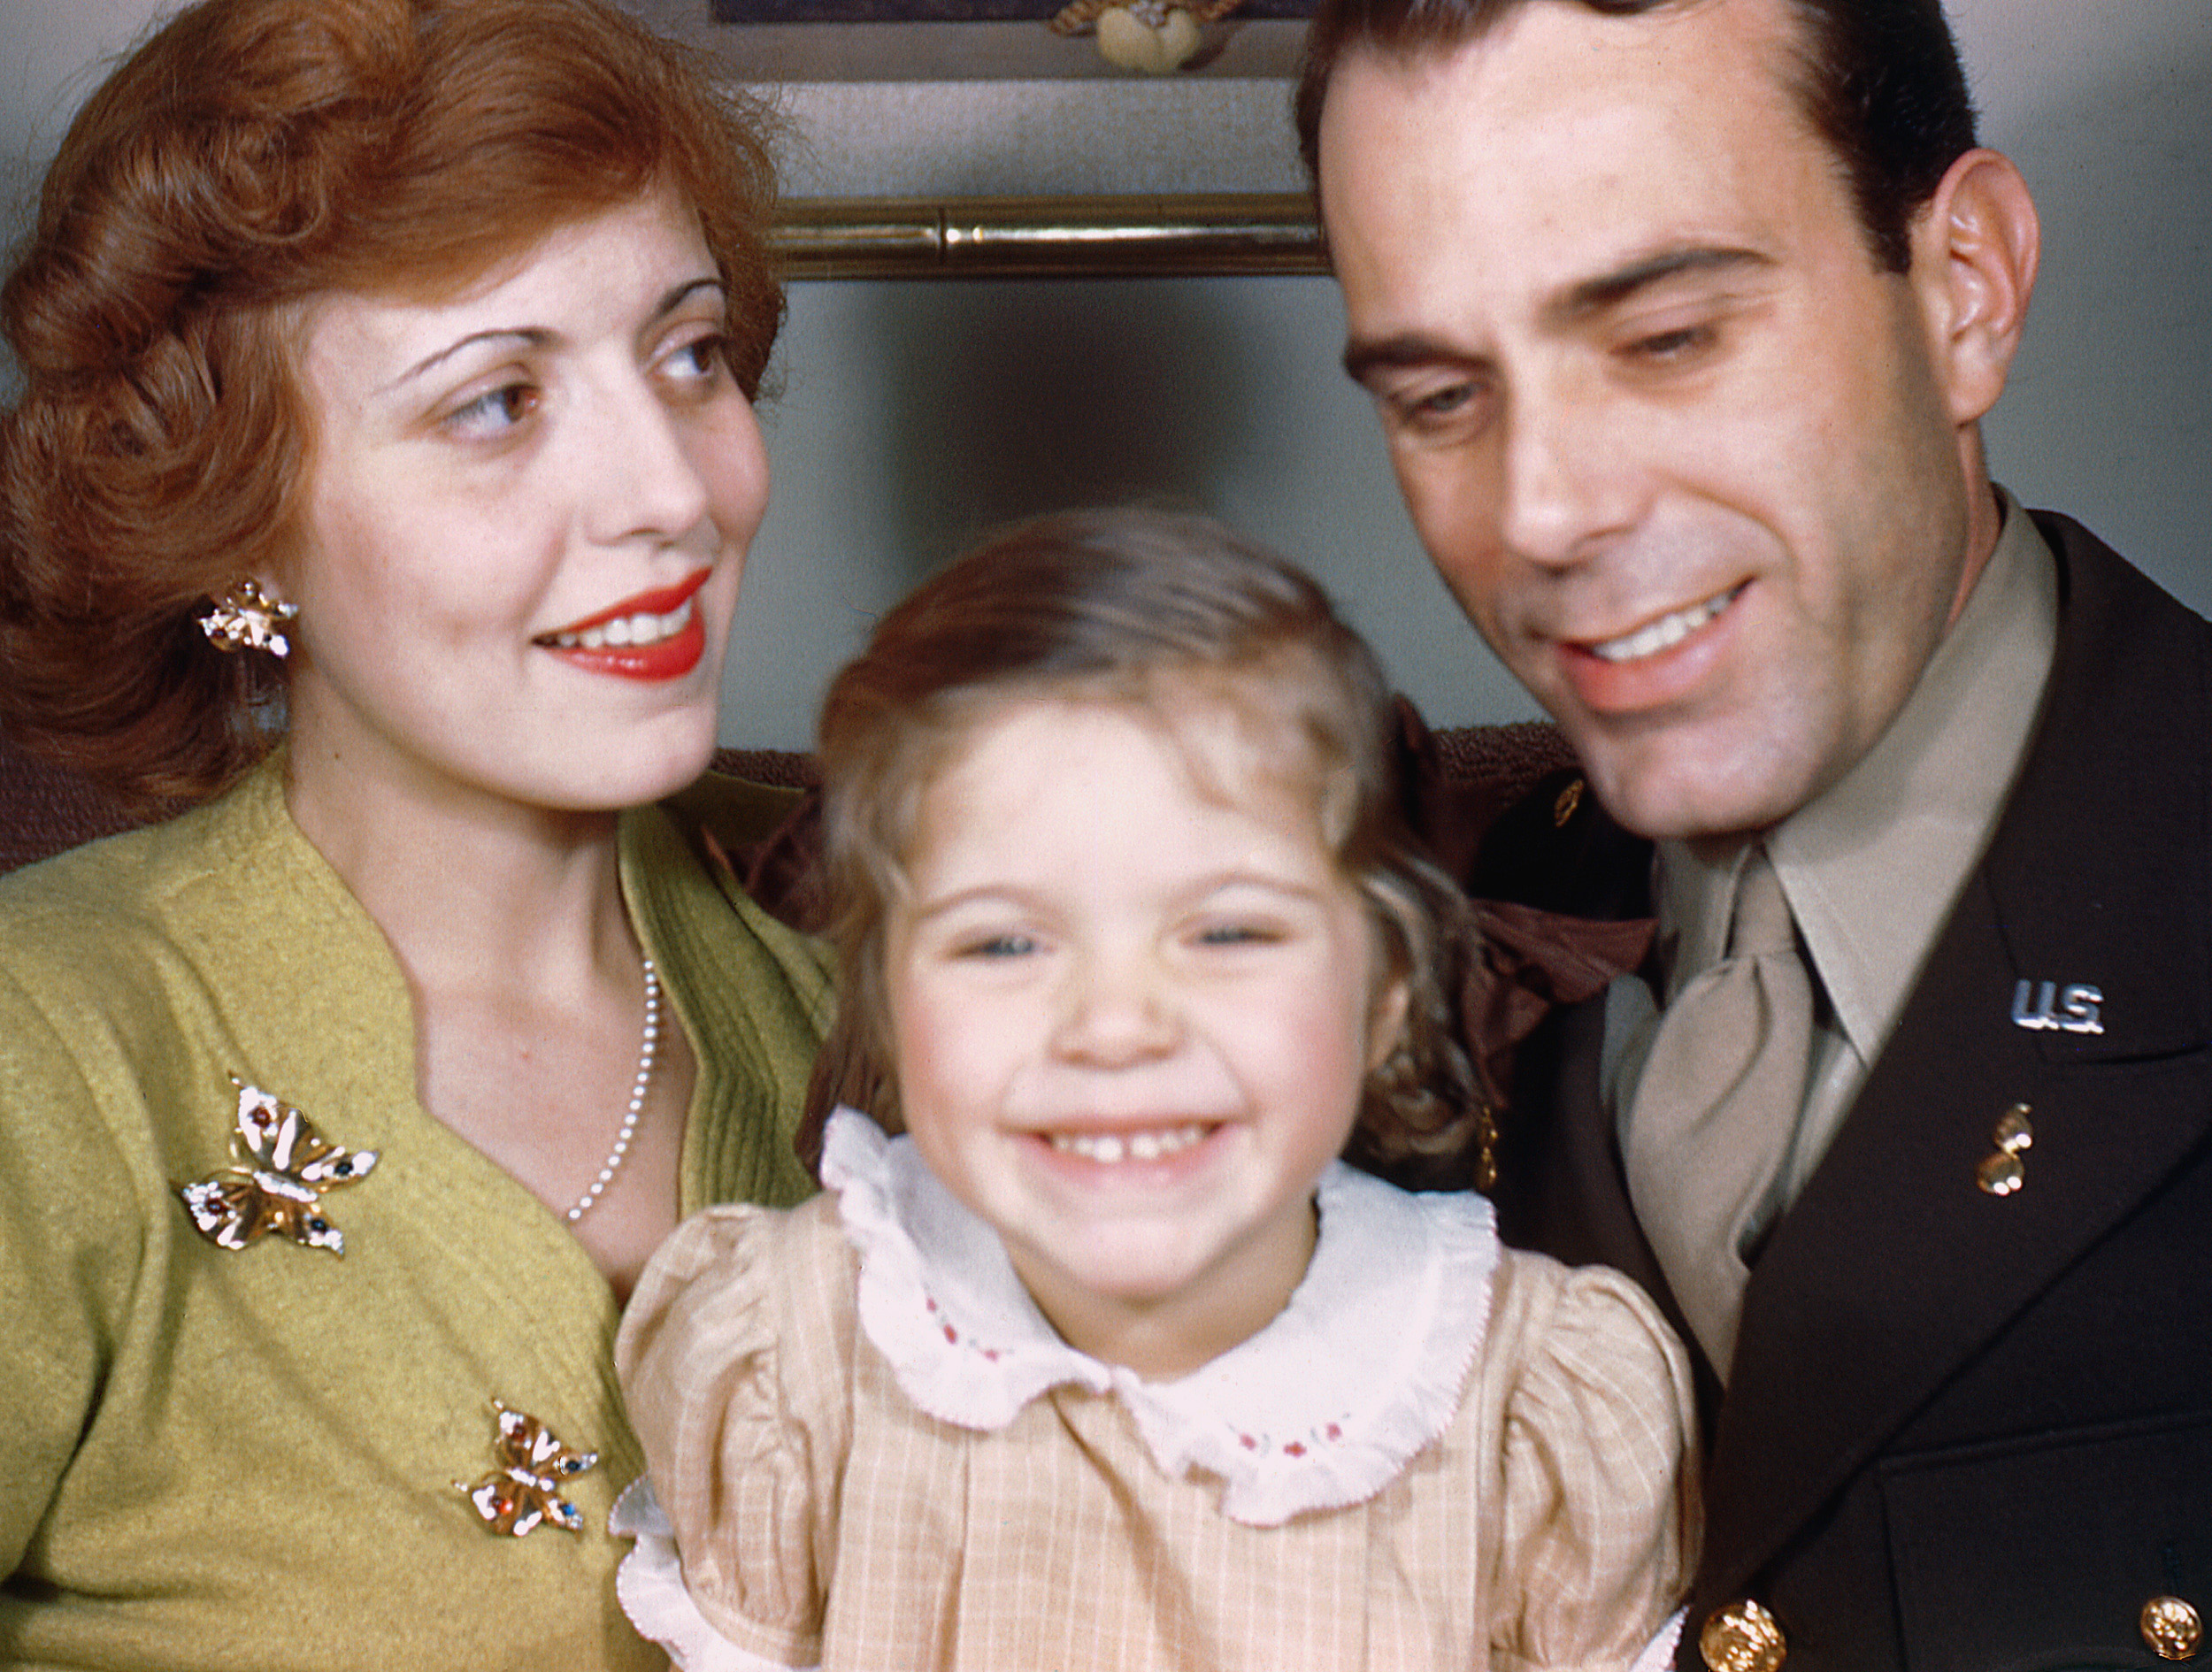 From the metal box collection that brought us Dressed to Smoke and These Three, etc., comes this family portrait. The Kodachrome slide has a tab with the name Allan Colegrove View full size.